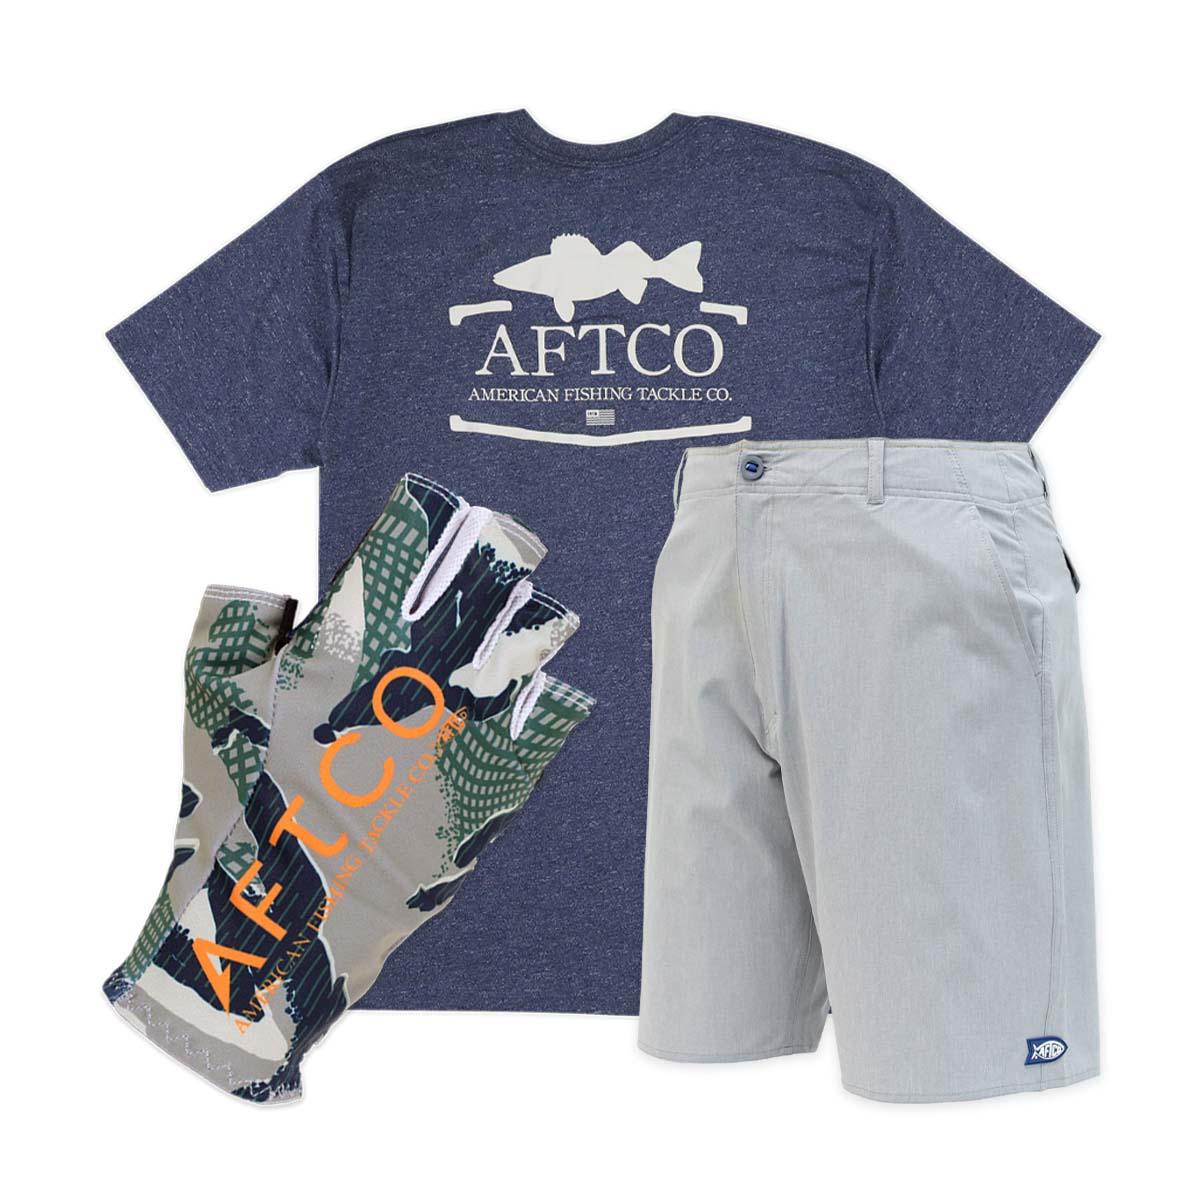 Aftco Performance Fishing Apparel